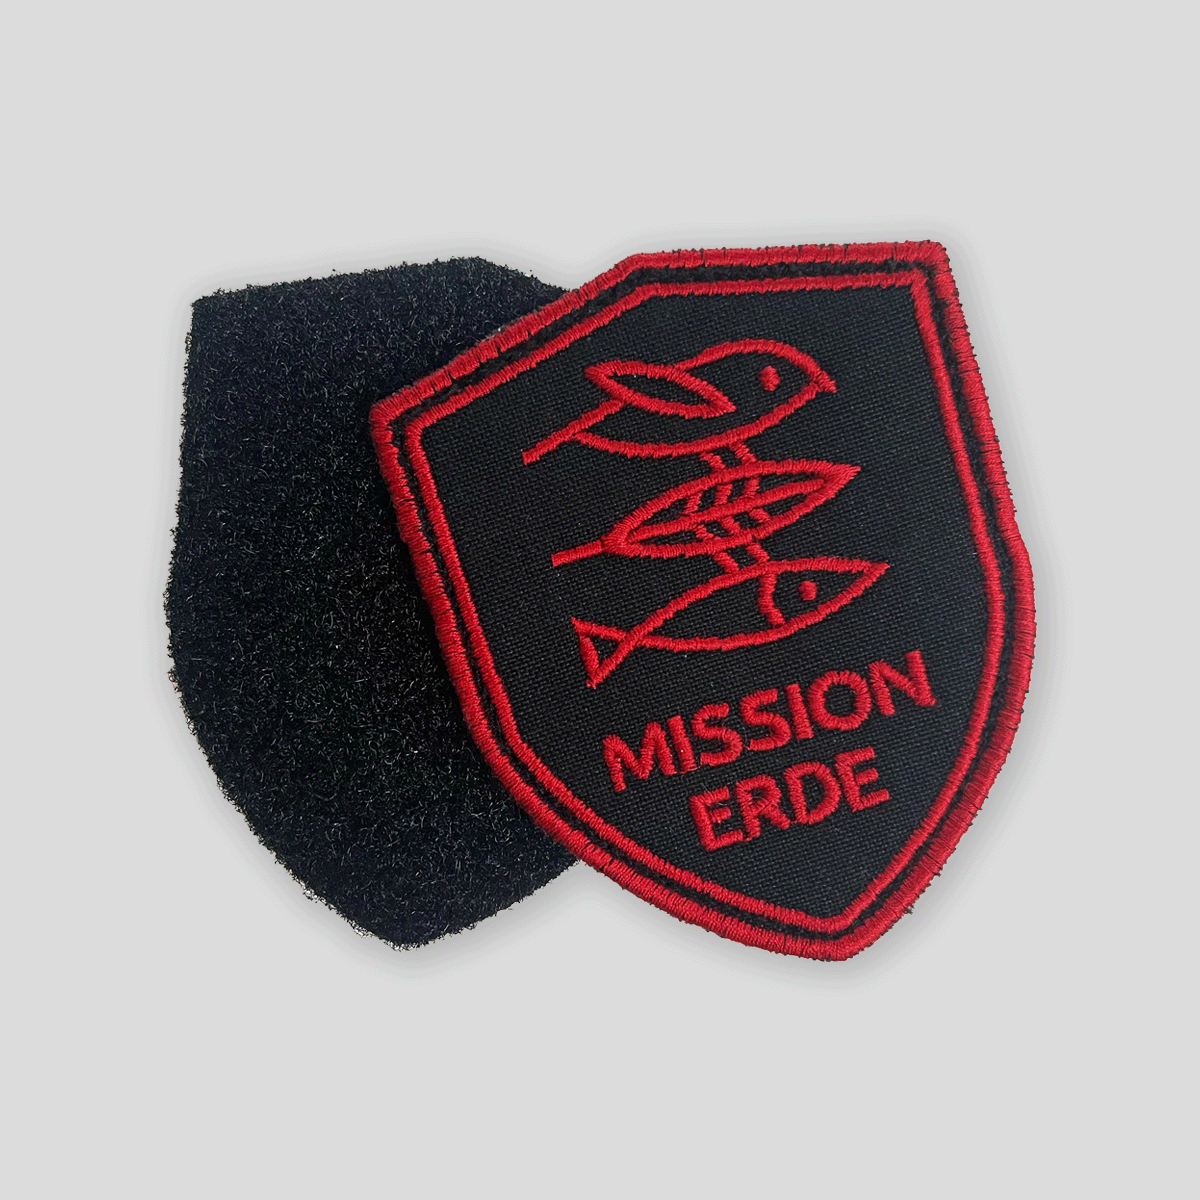 Patch "Mission Red"